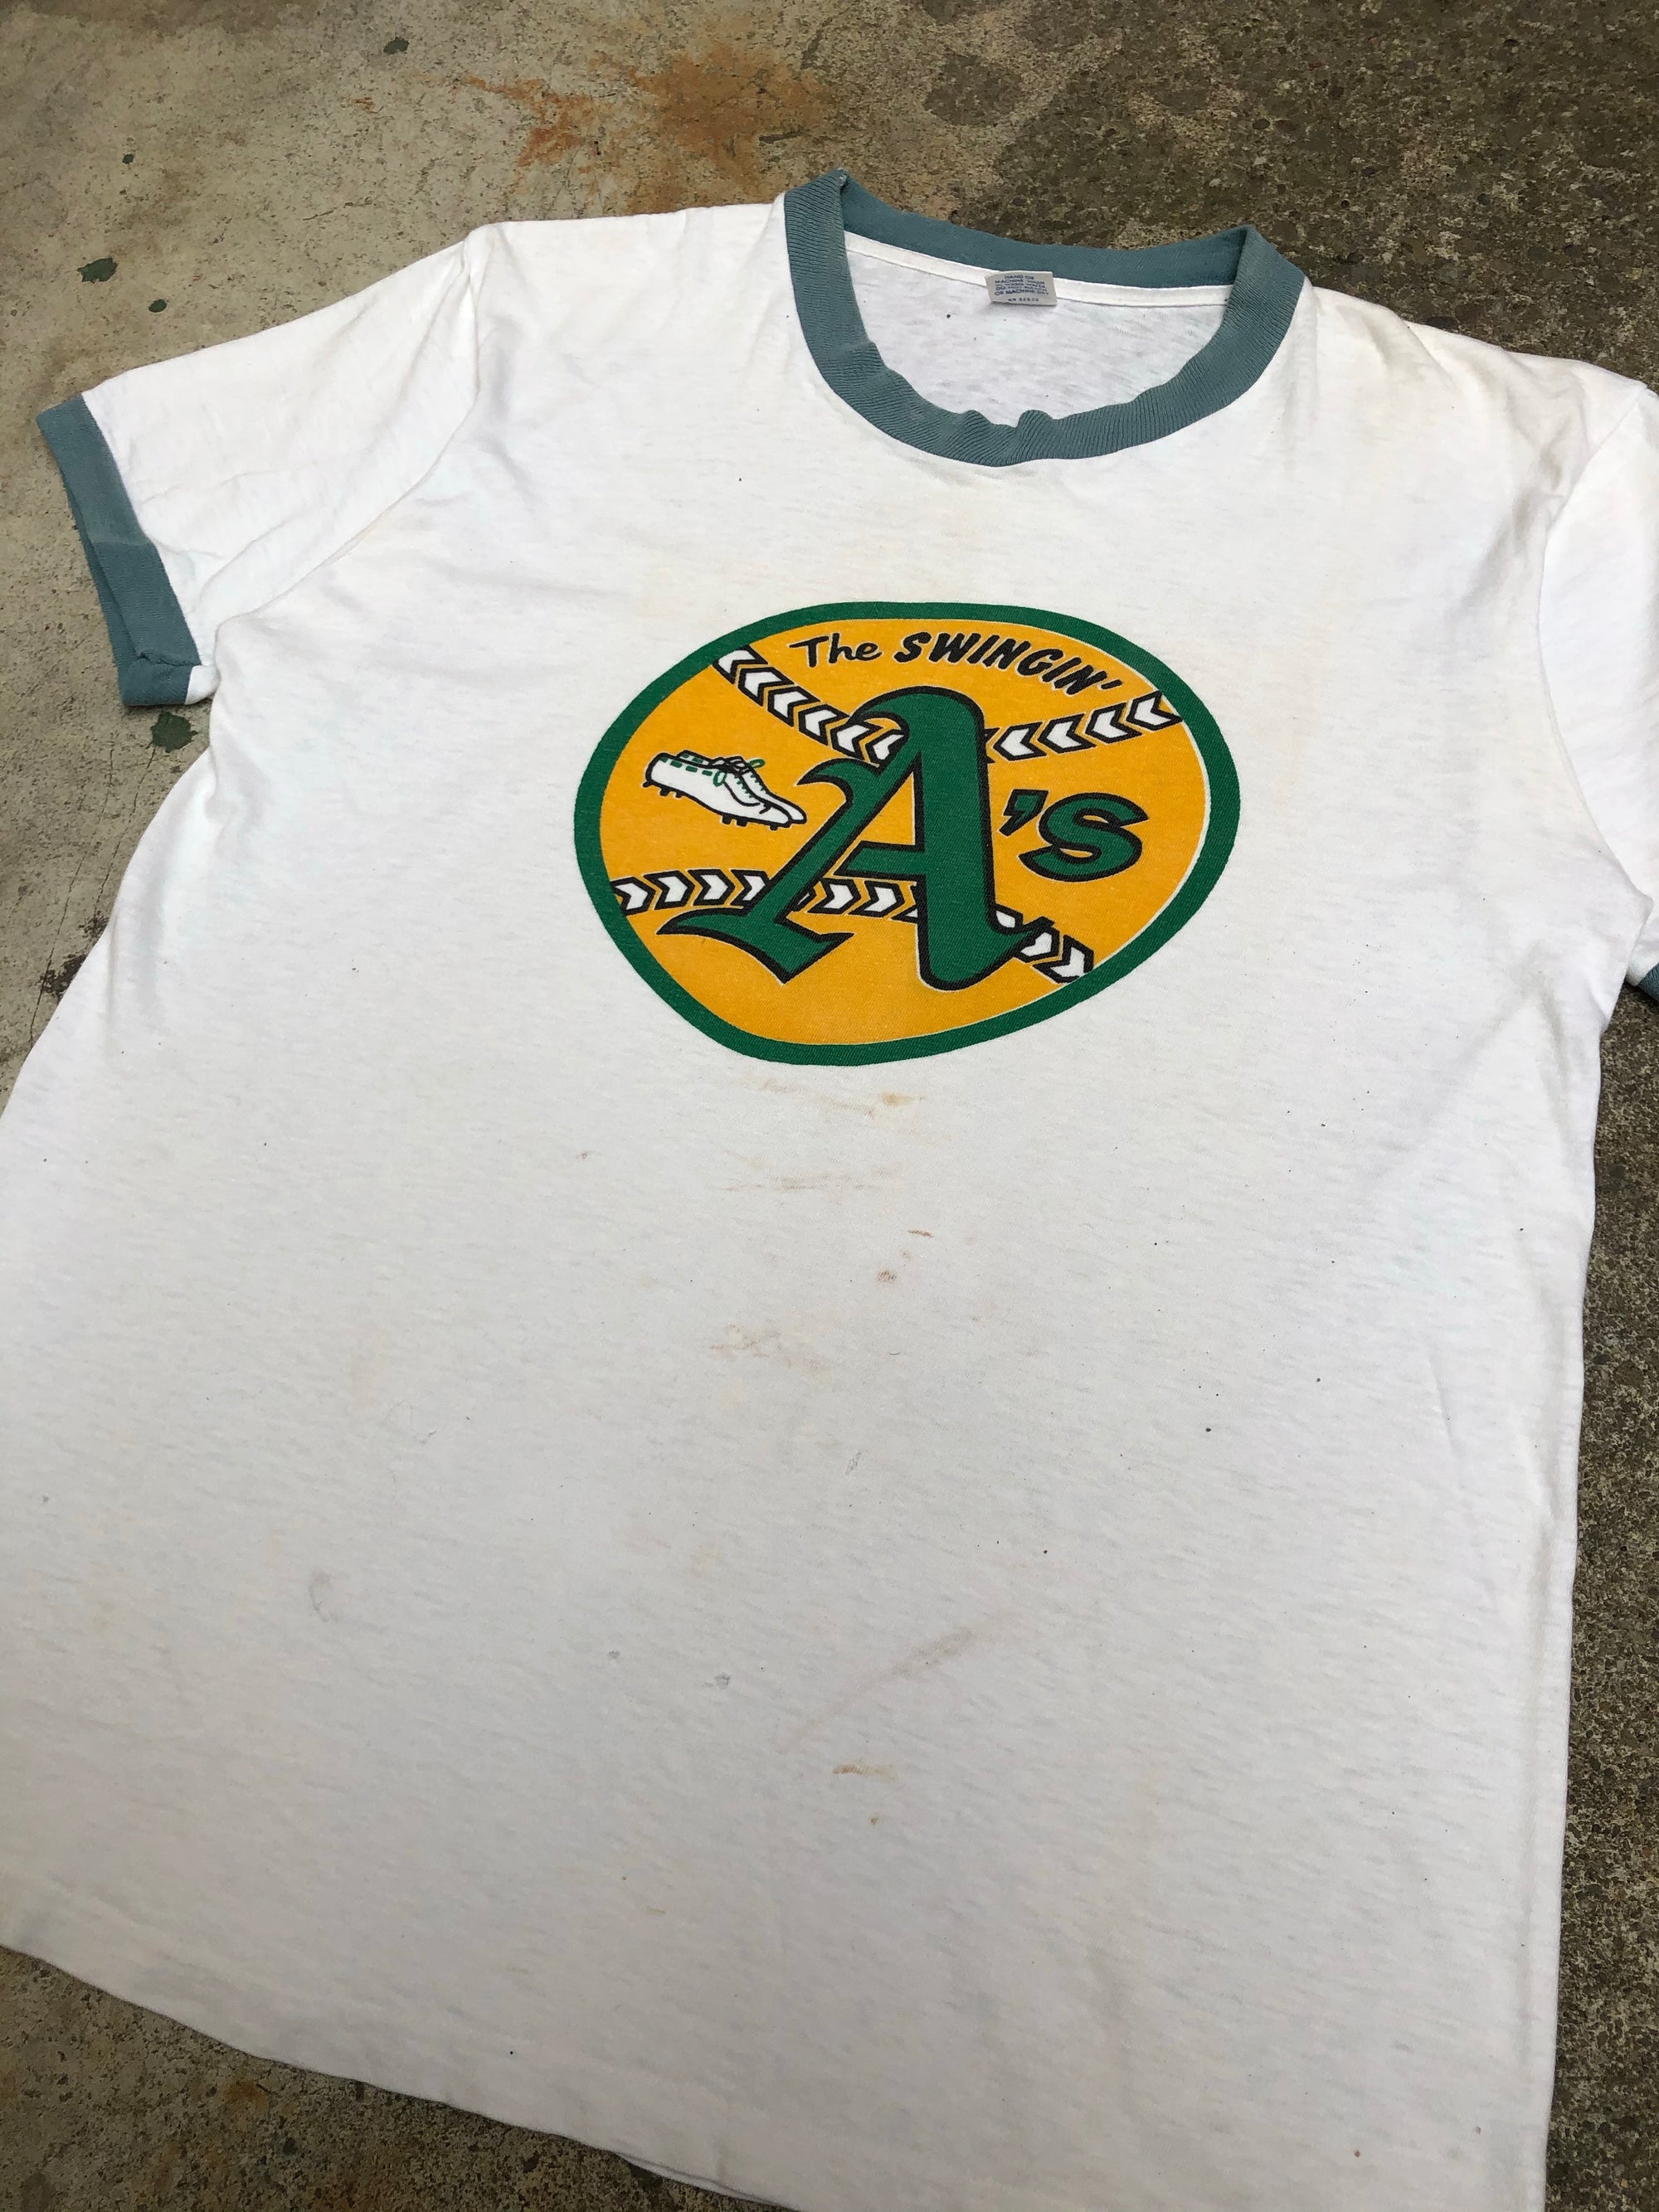 1970s Single Stitched “The Swingin’ A’s” Ringer Tee